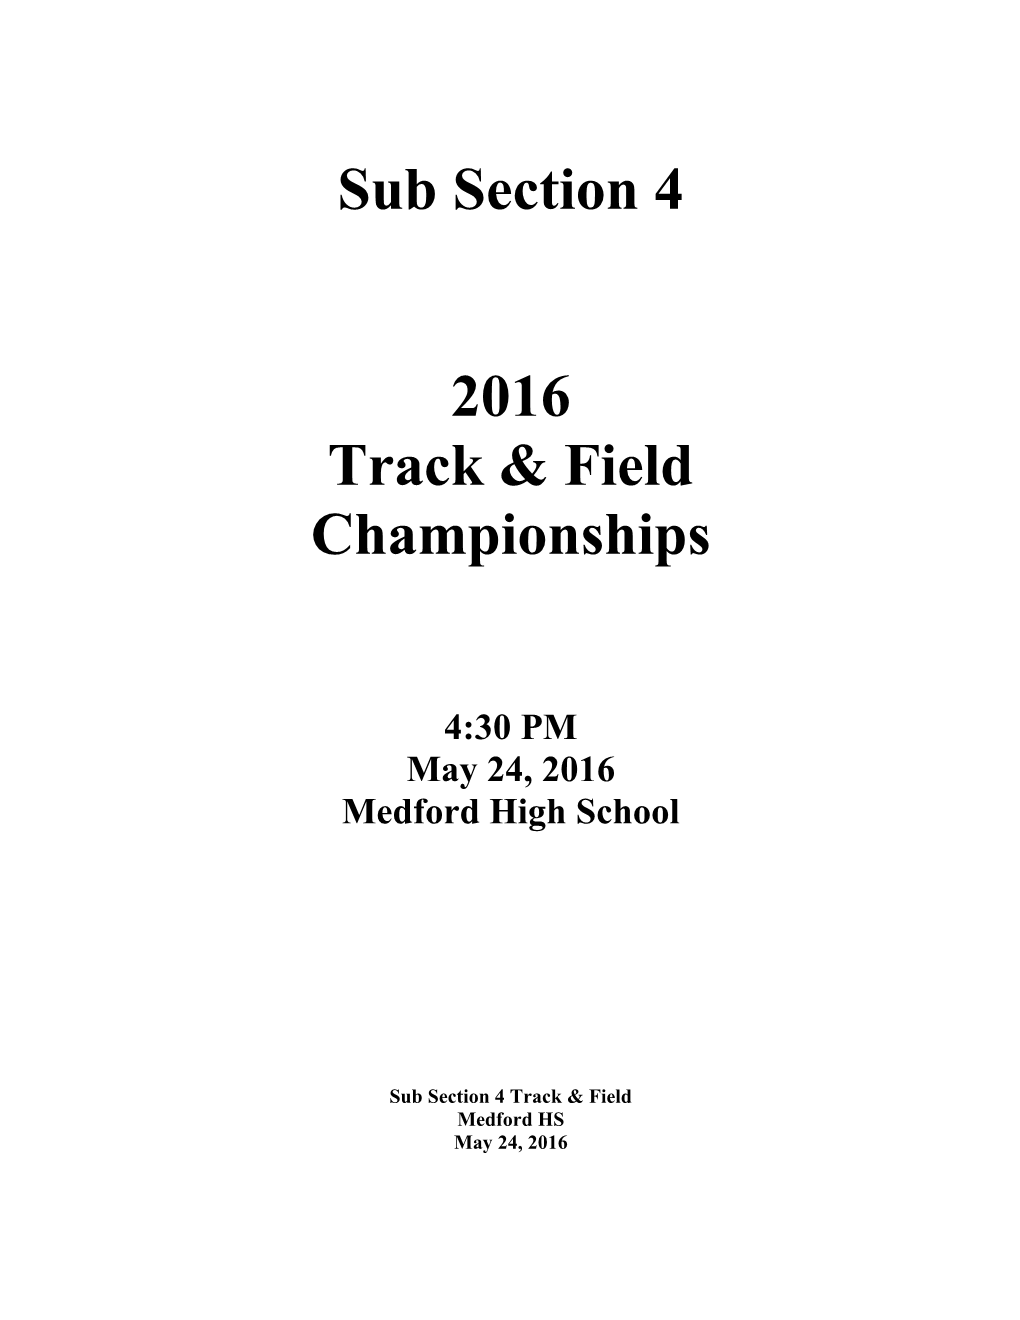 Sub Section 4 Track & Field